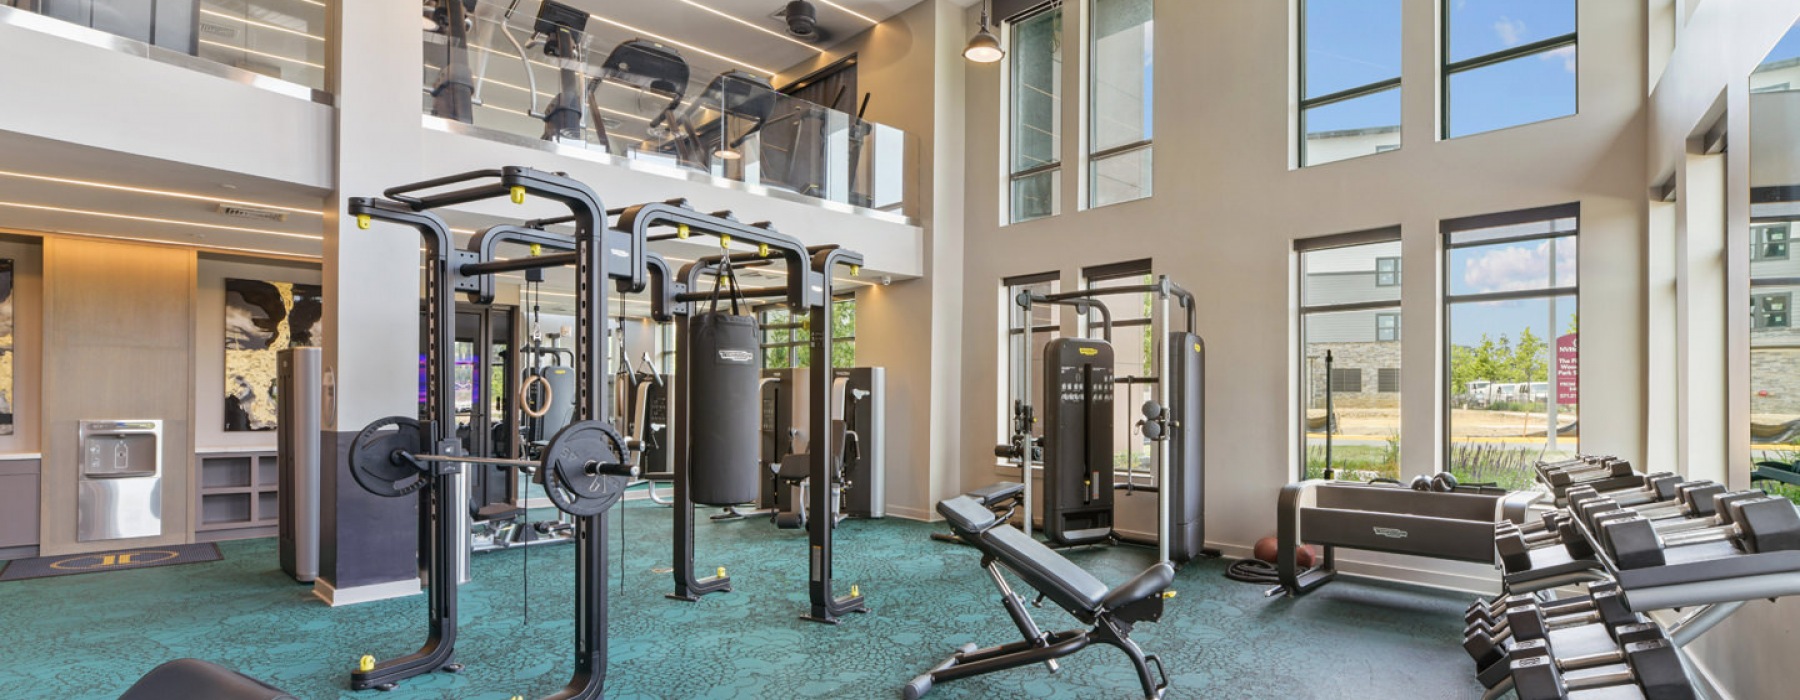 Spacious two story fitness center